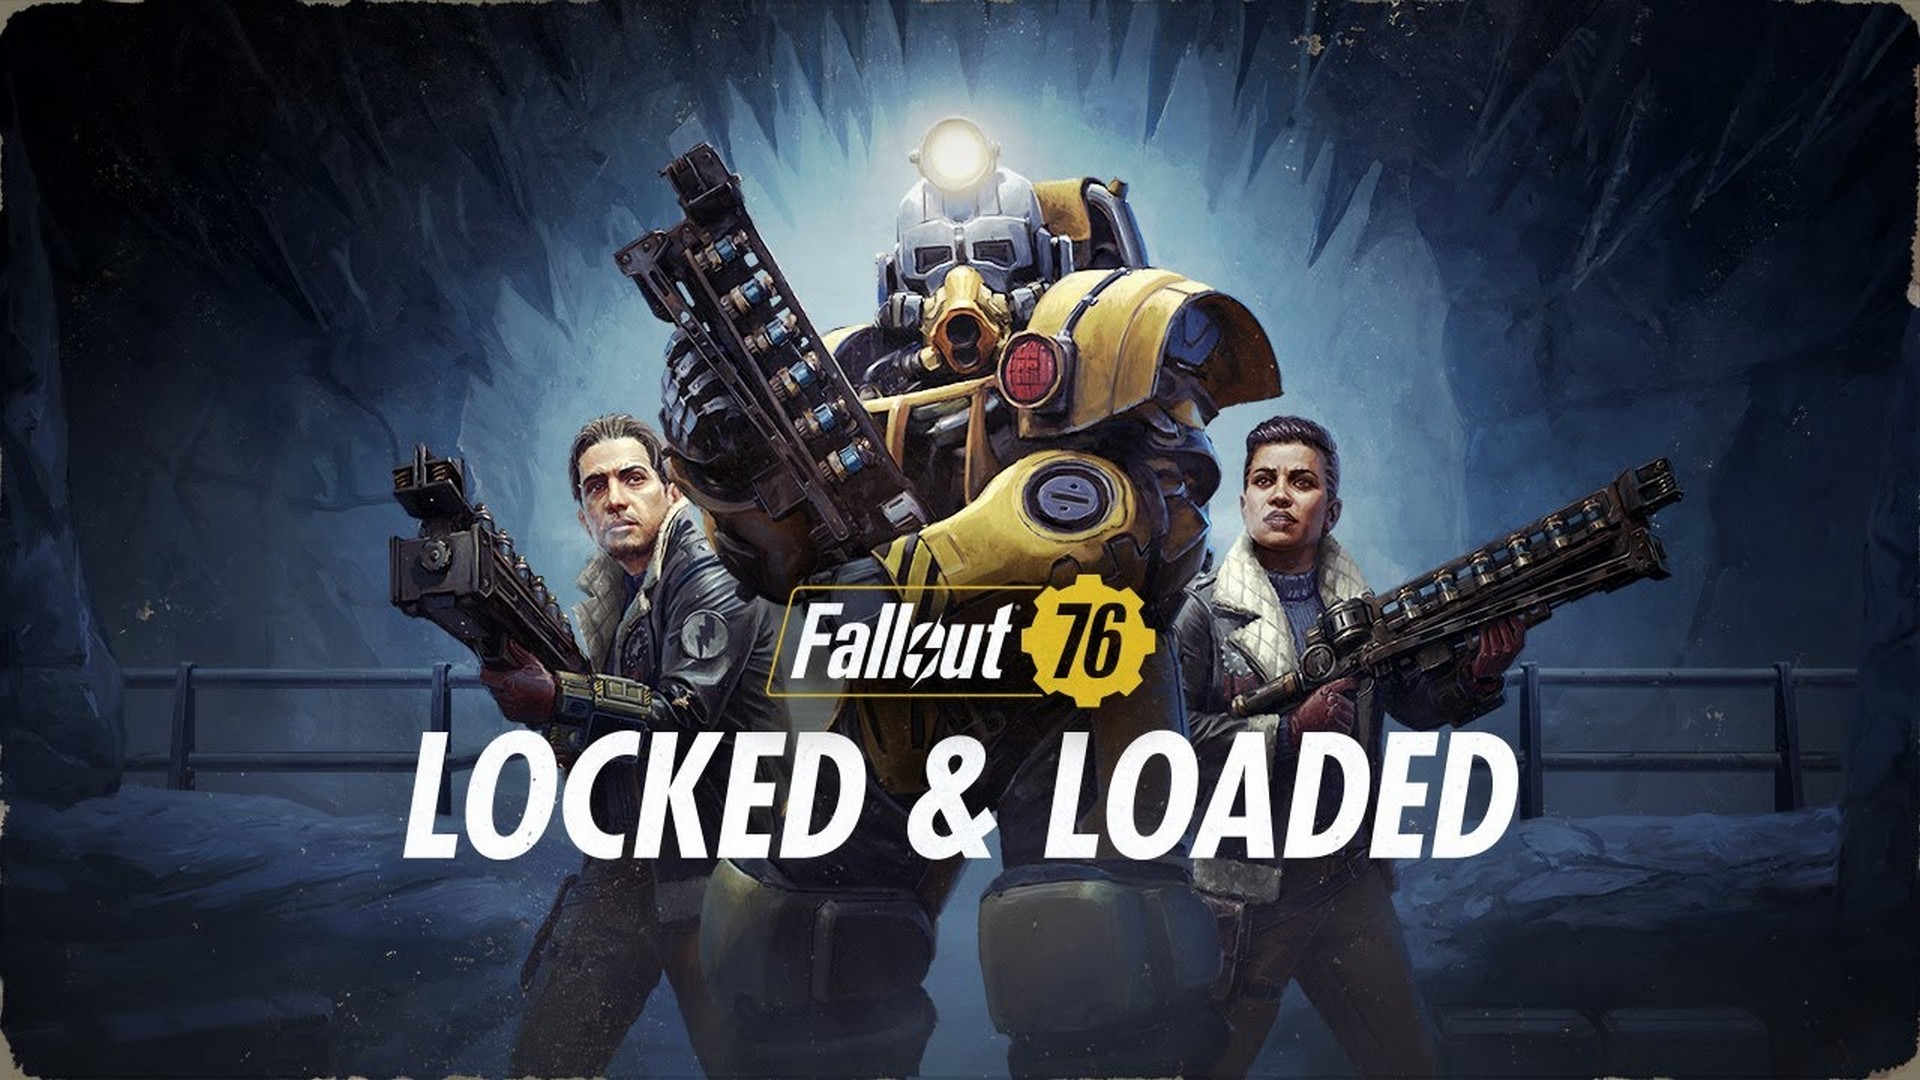 Fallout 76: Locked & Loaded Update Now Available